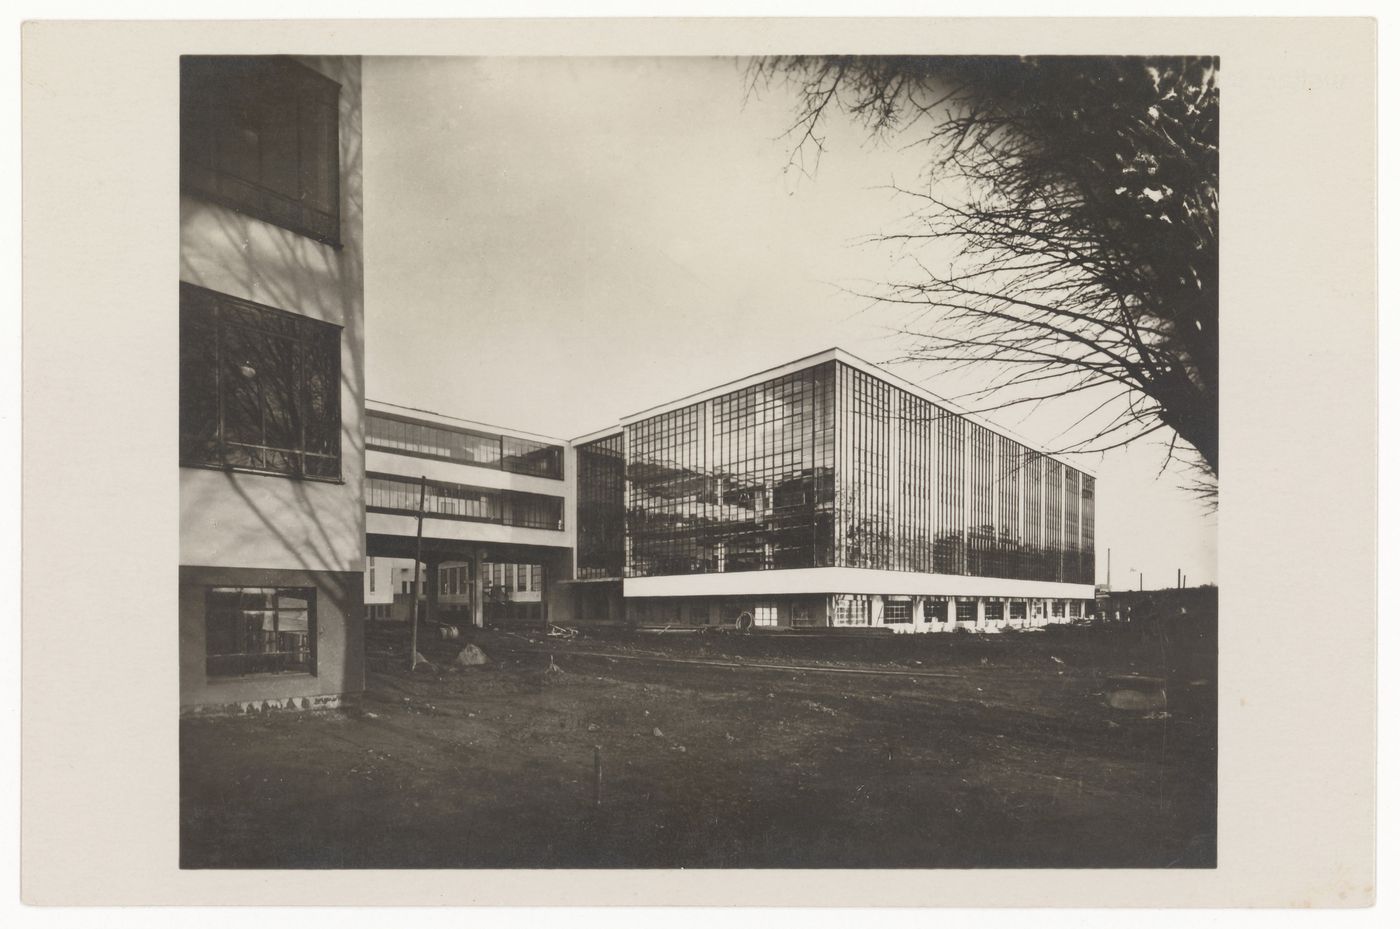 Exterior view of the Bauhaus building showing the housing wing of Dessau Technical School and the administration and workshop wings, Dessau, Germany